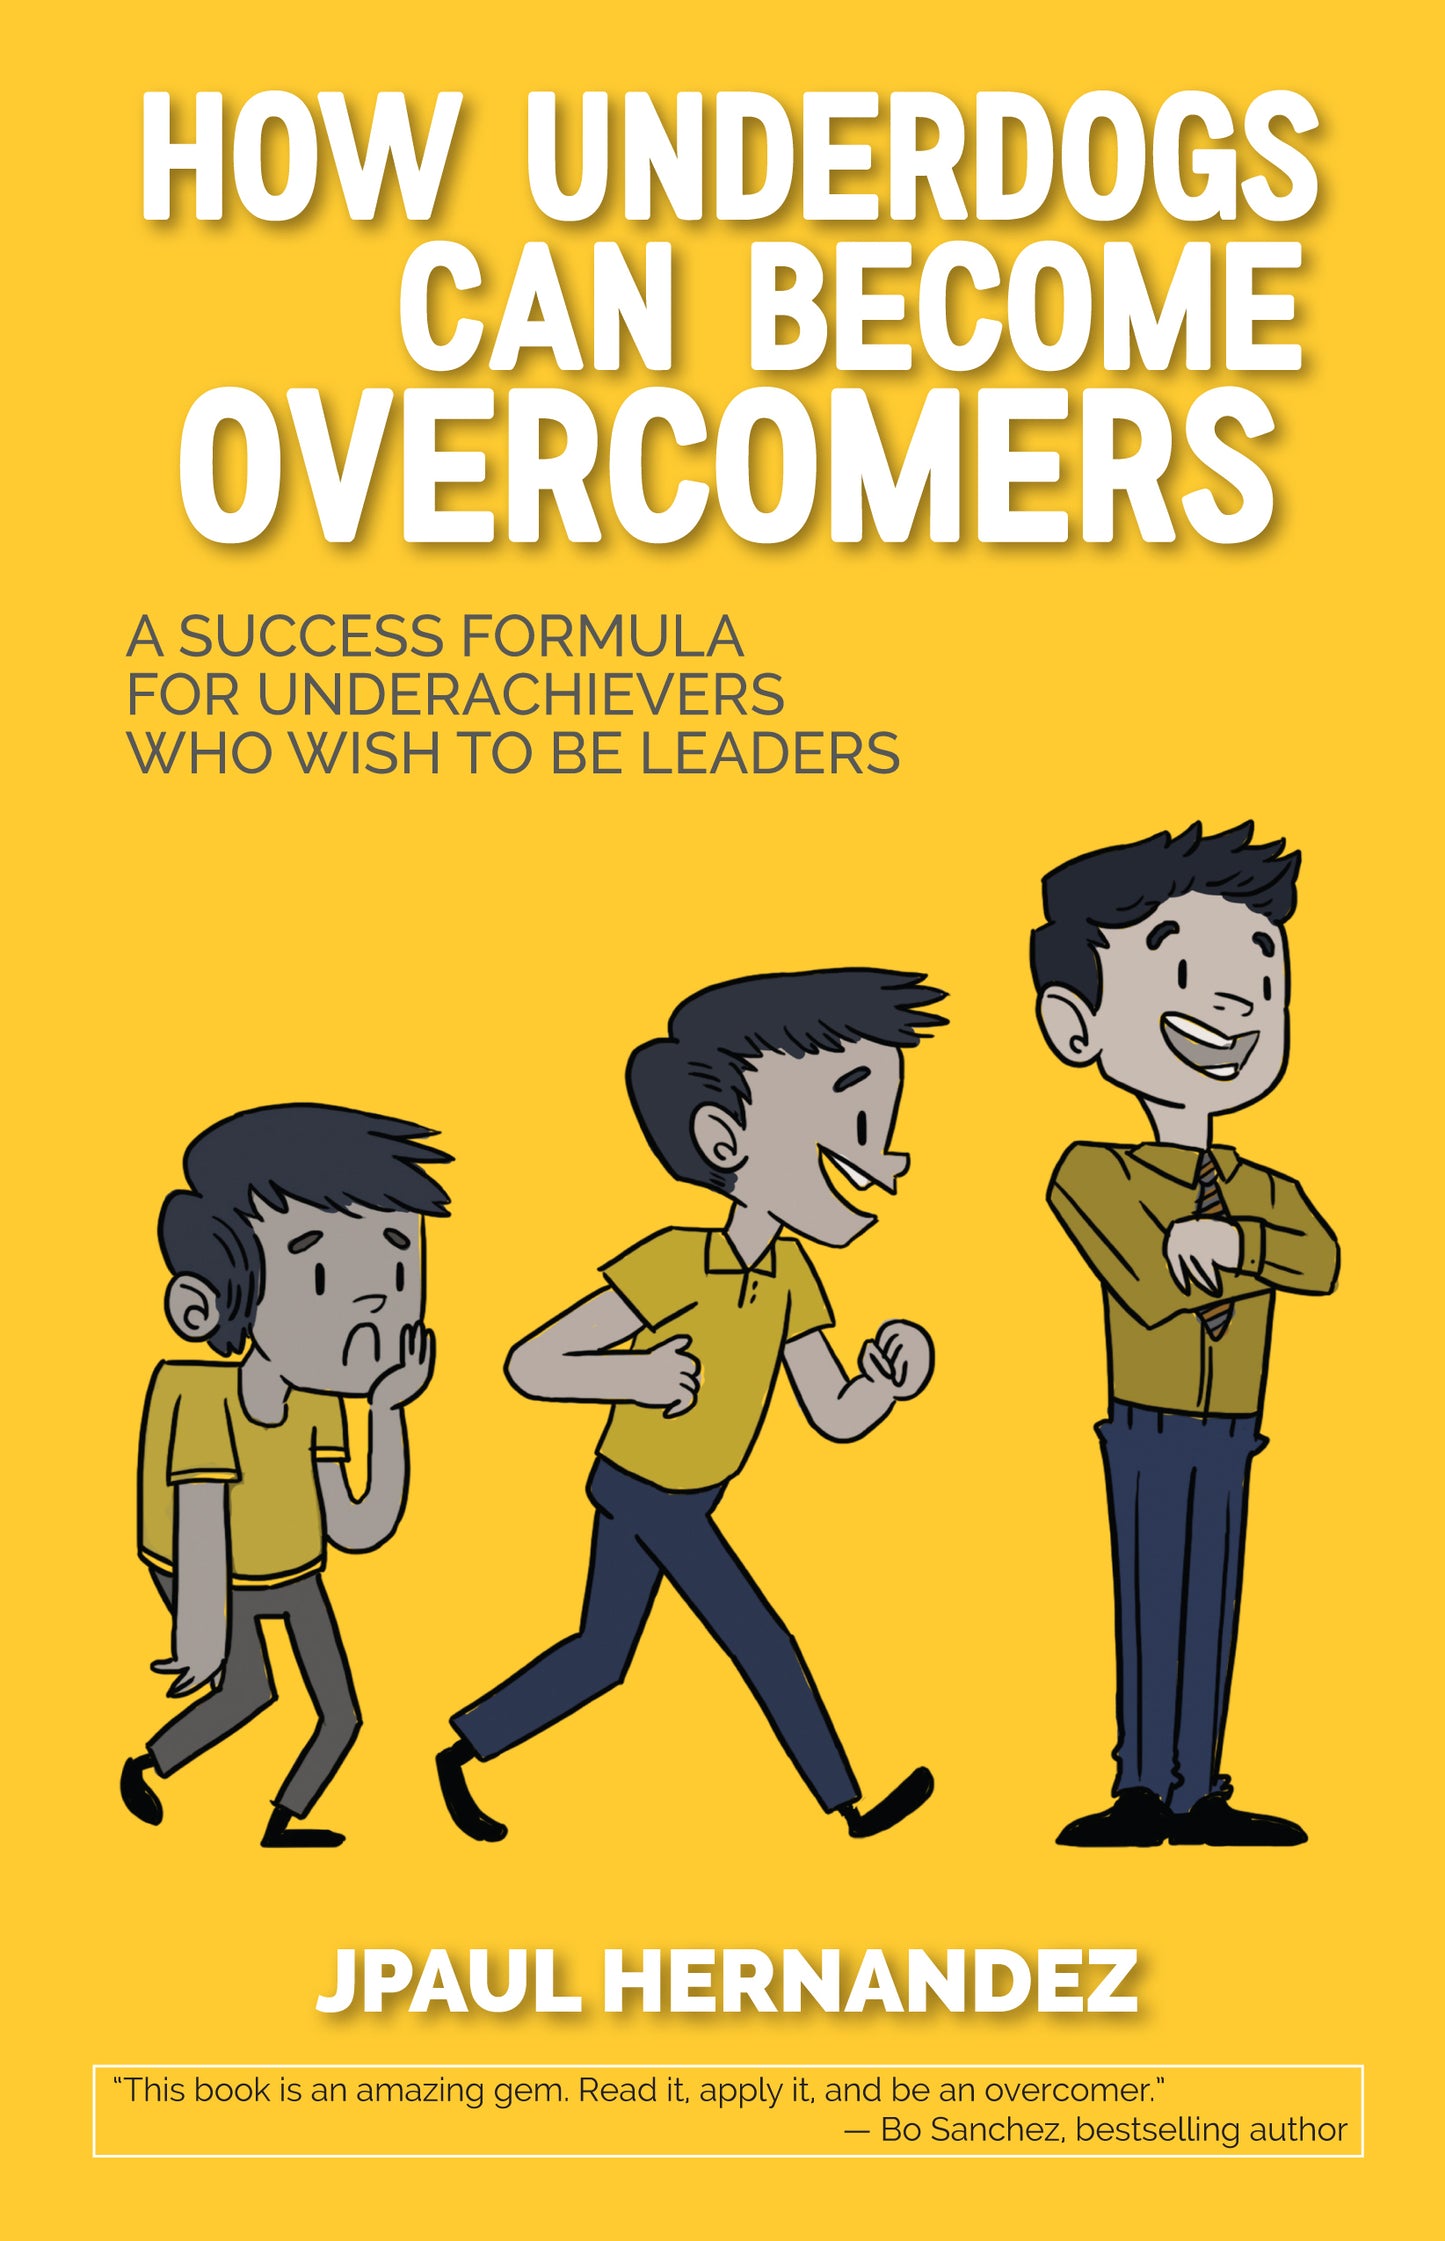 How Underdogs Can Become Overcomers: A Success Formula for Underachievers Who Wish to be Leaders